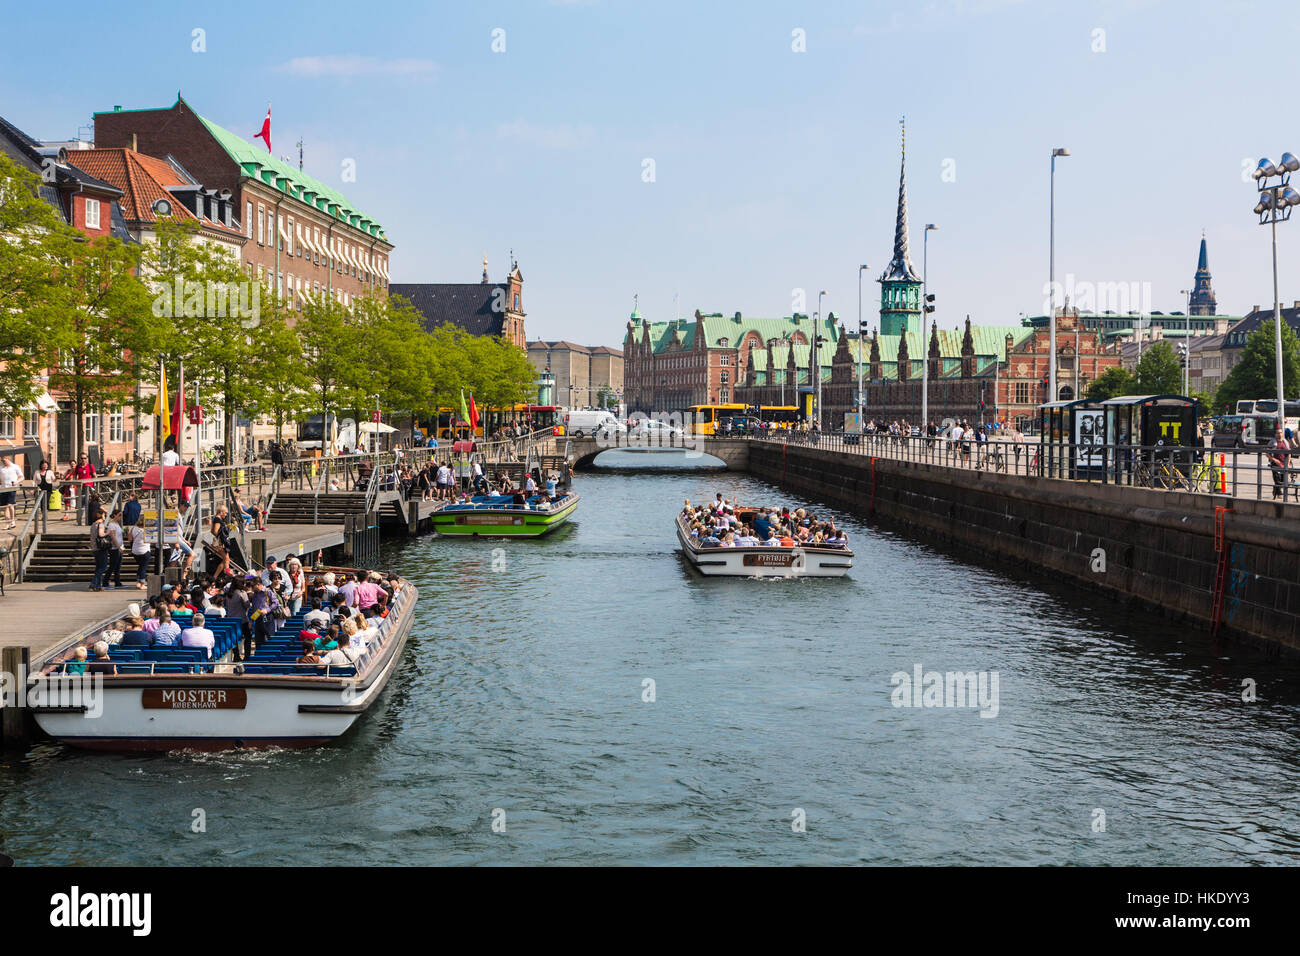 COPENHAGEN, DENMARK - MAY 24, 2016: Tourists enjoy the traditional architecture from a tourist boat along the canals of Denmark capital city on a sunn Stock Photo